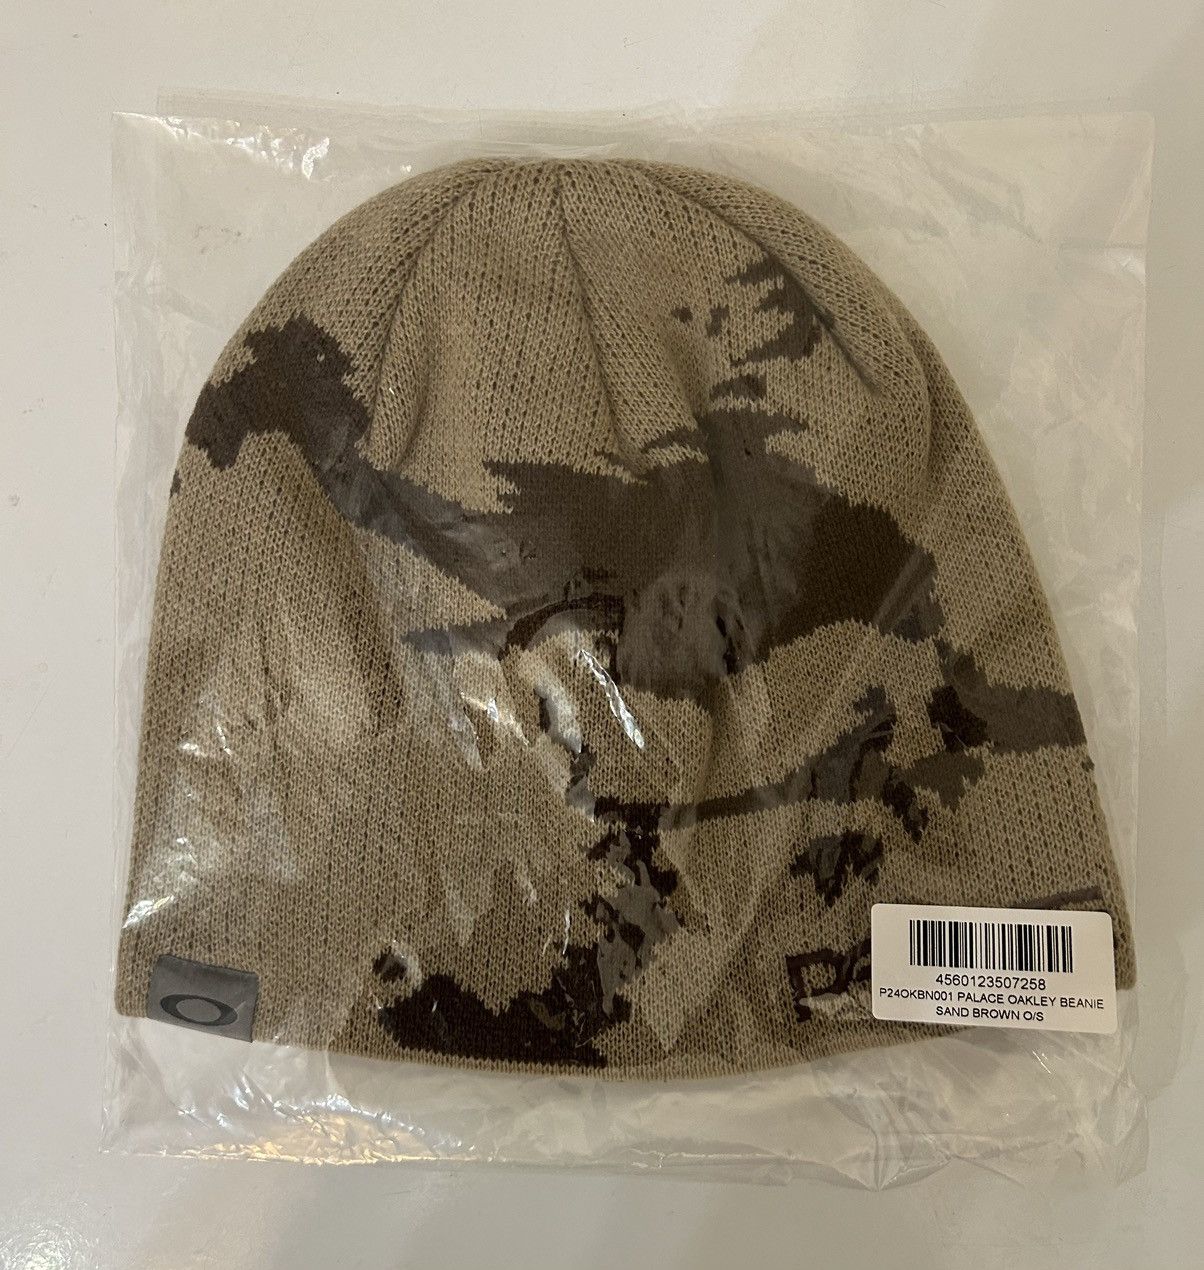 Palace Palace Oakley Beanie Sand/ Brown | Grailed